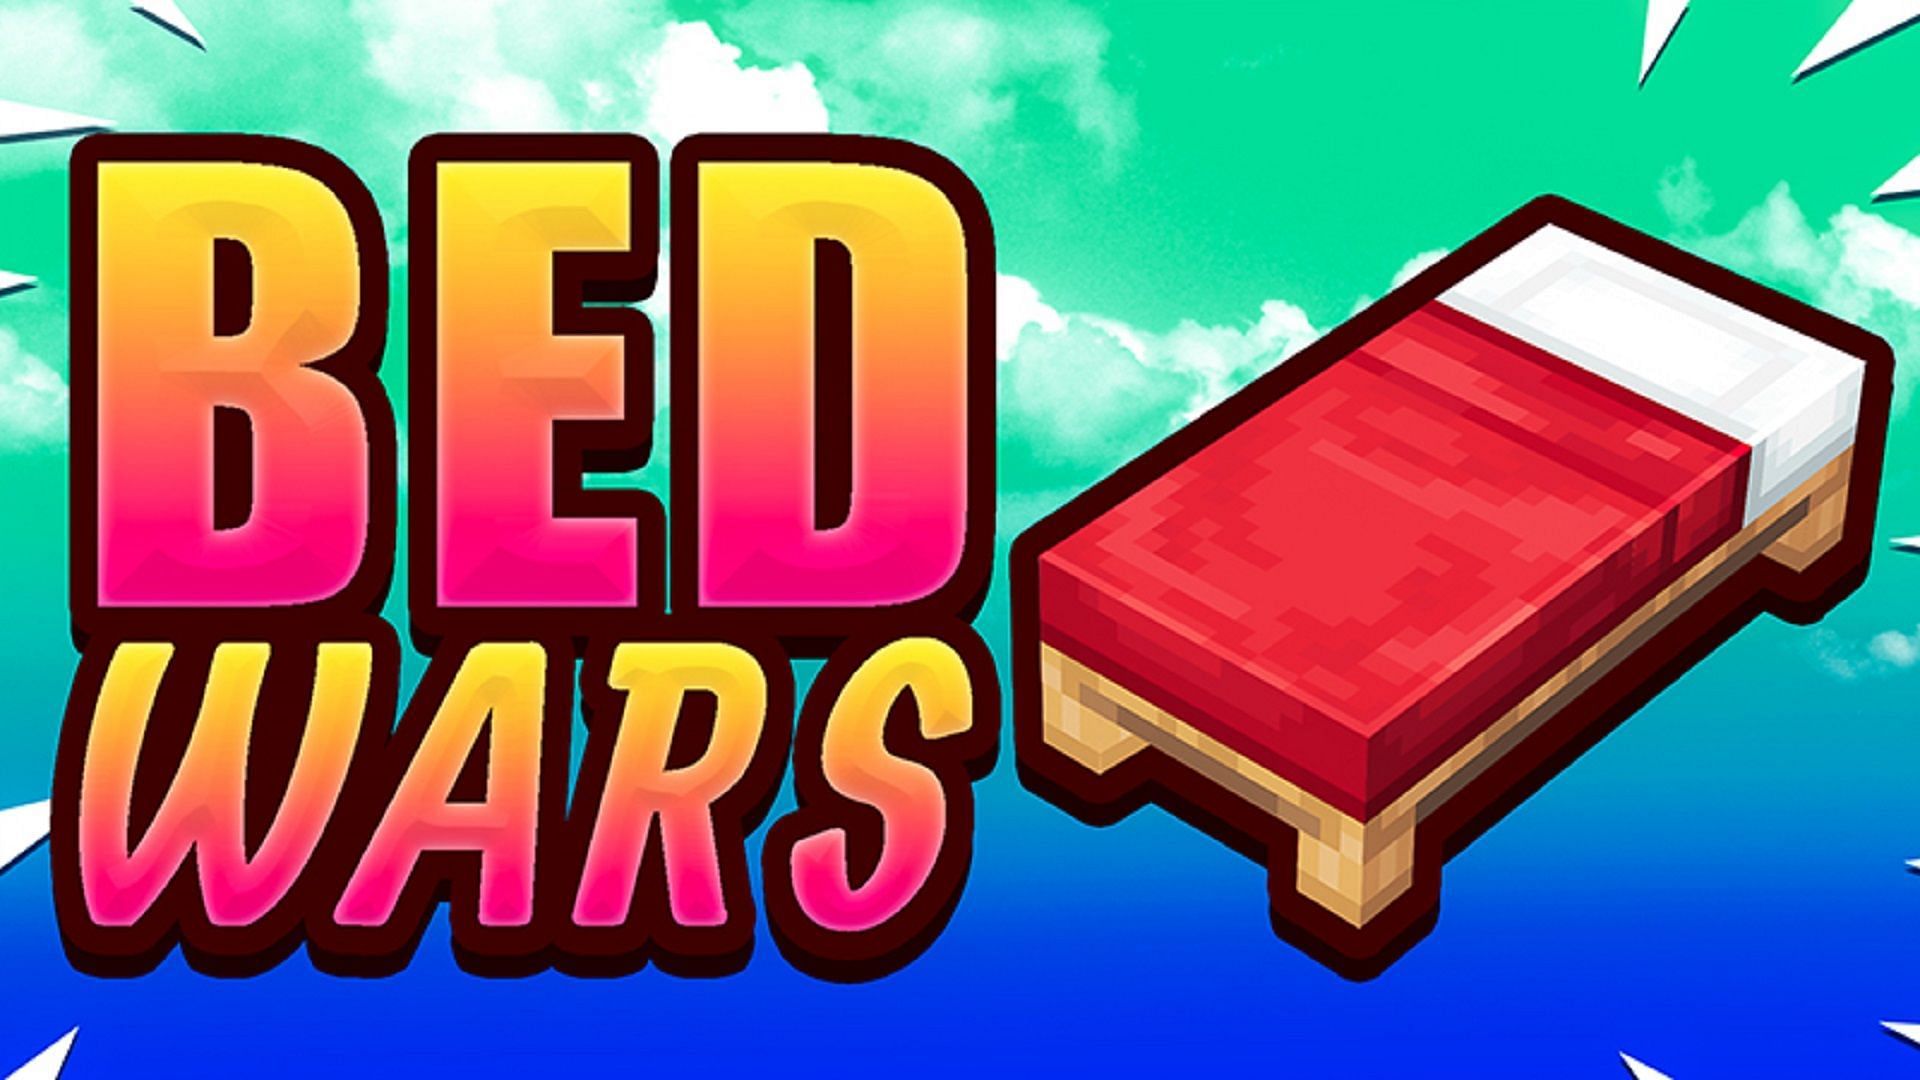 Ultimate Bedwars in Minecraft Marketplace